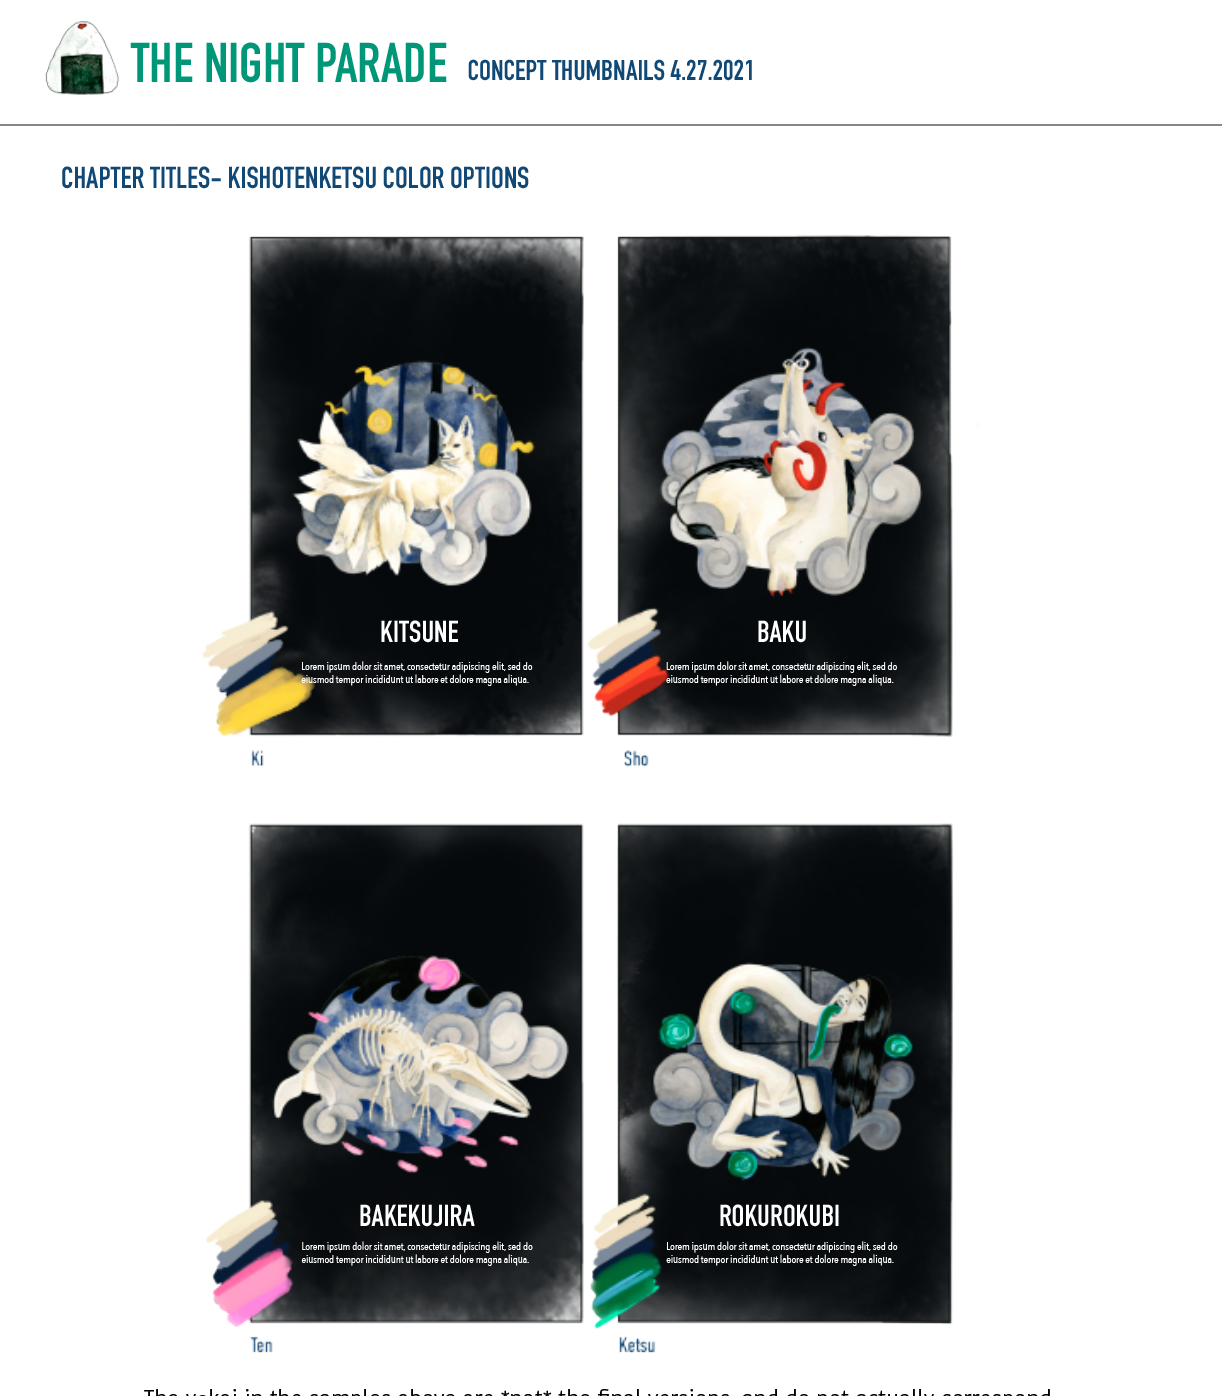 Screenshot of 4 thumbnail images of yokai illustrations with colors scribbled on them